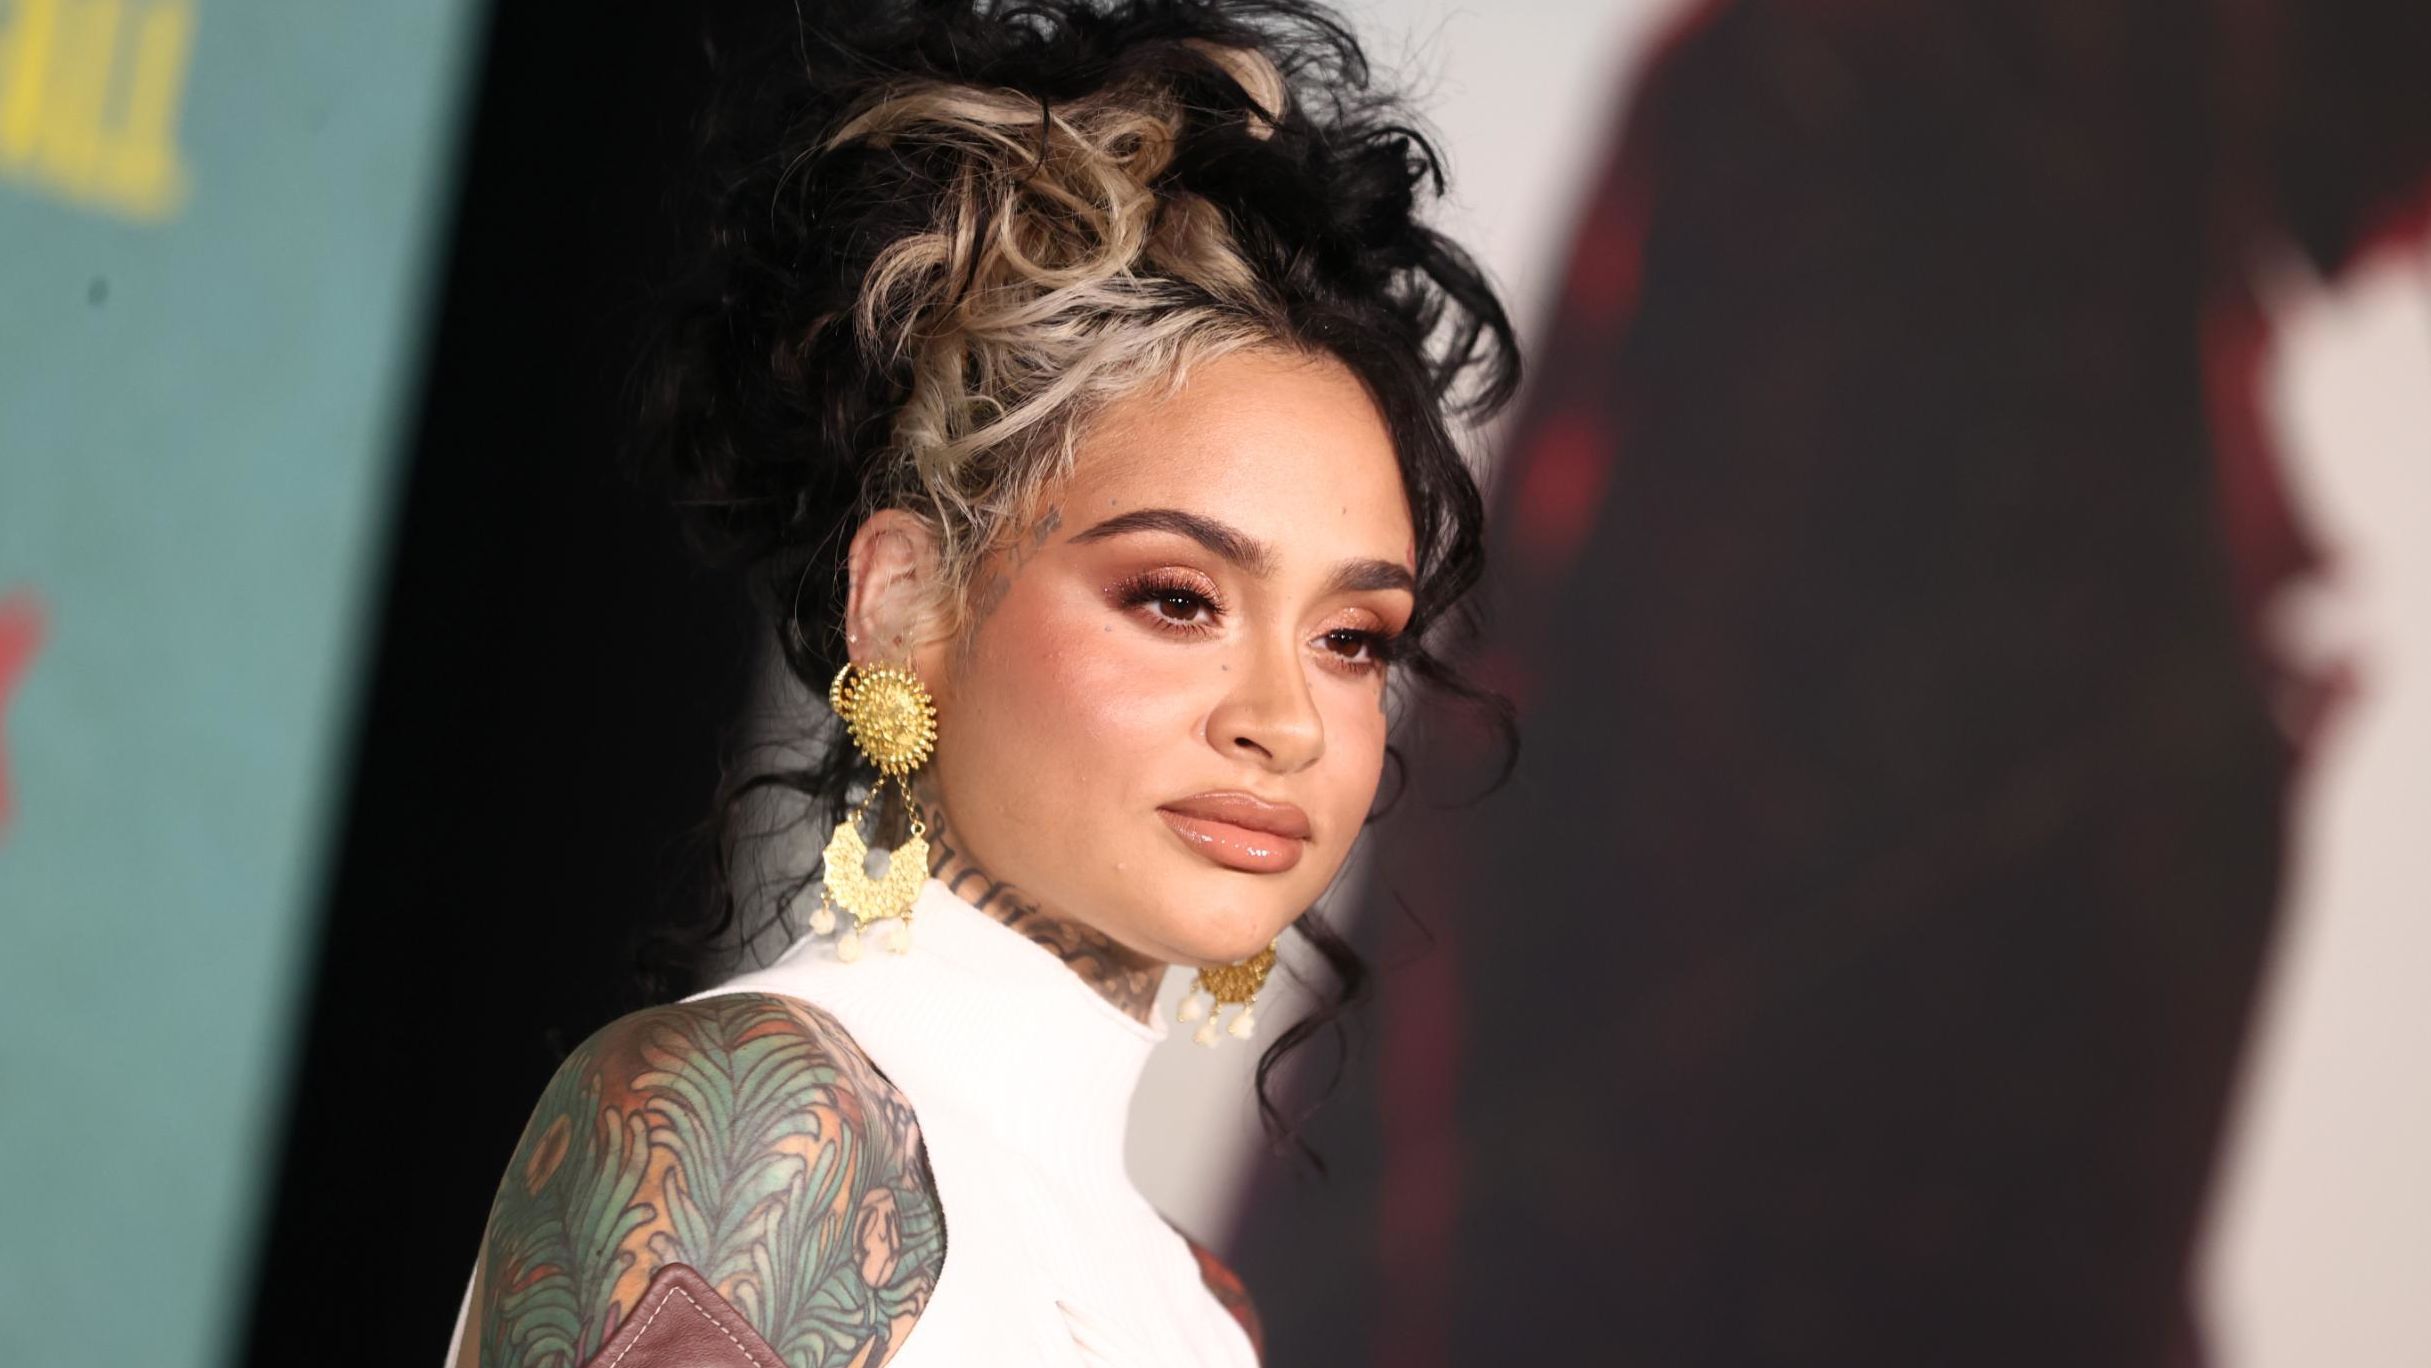 Kehlani attends the Los Angeles premiere of "The Harder They Fall" at Shrine Auditorium and Expo Hall on October 13, 2021. 